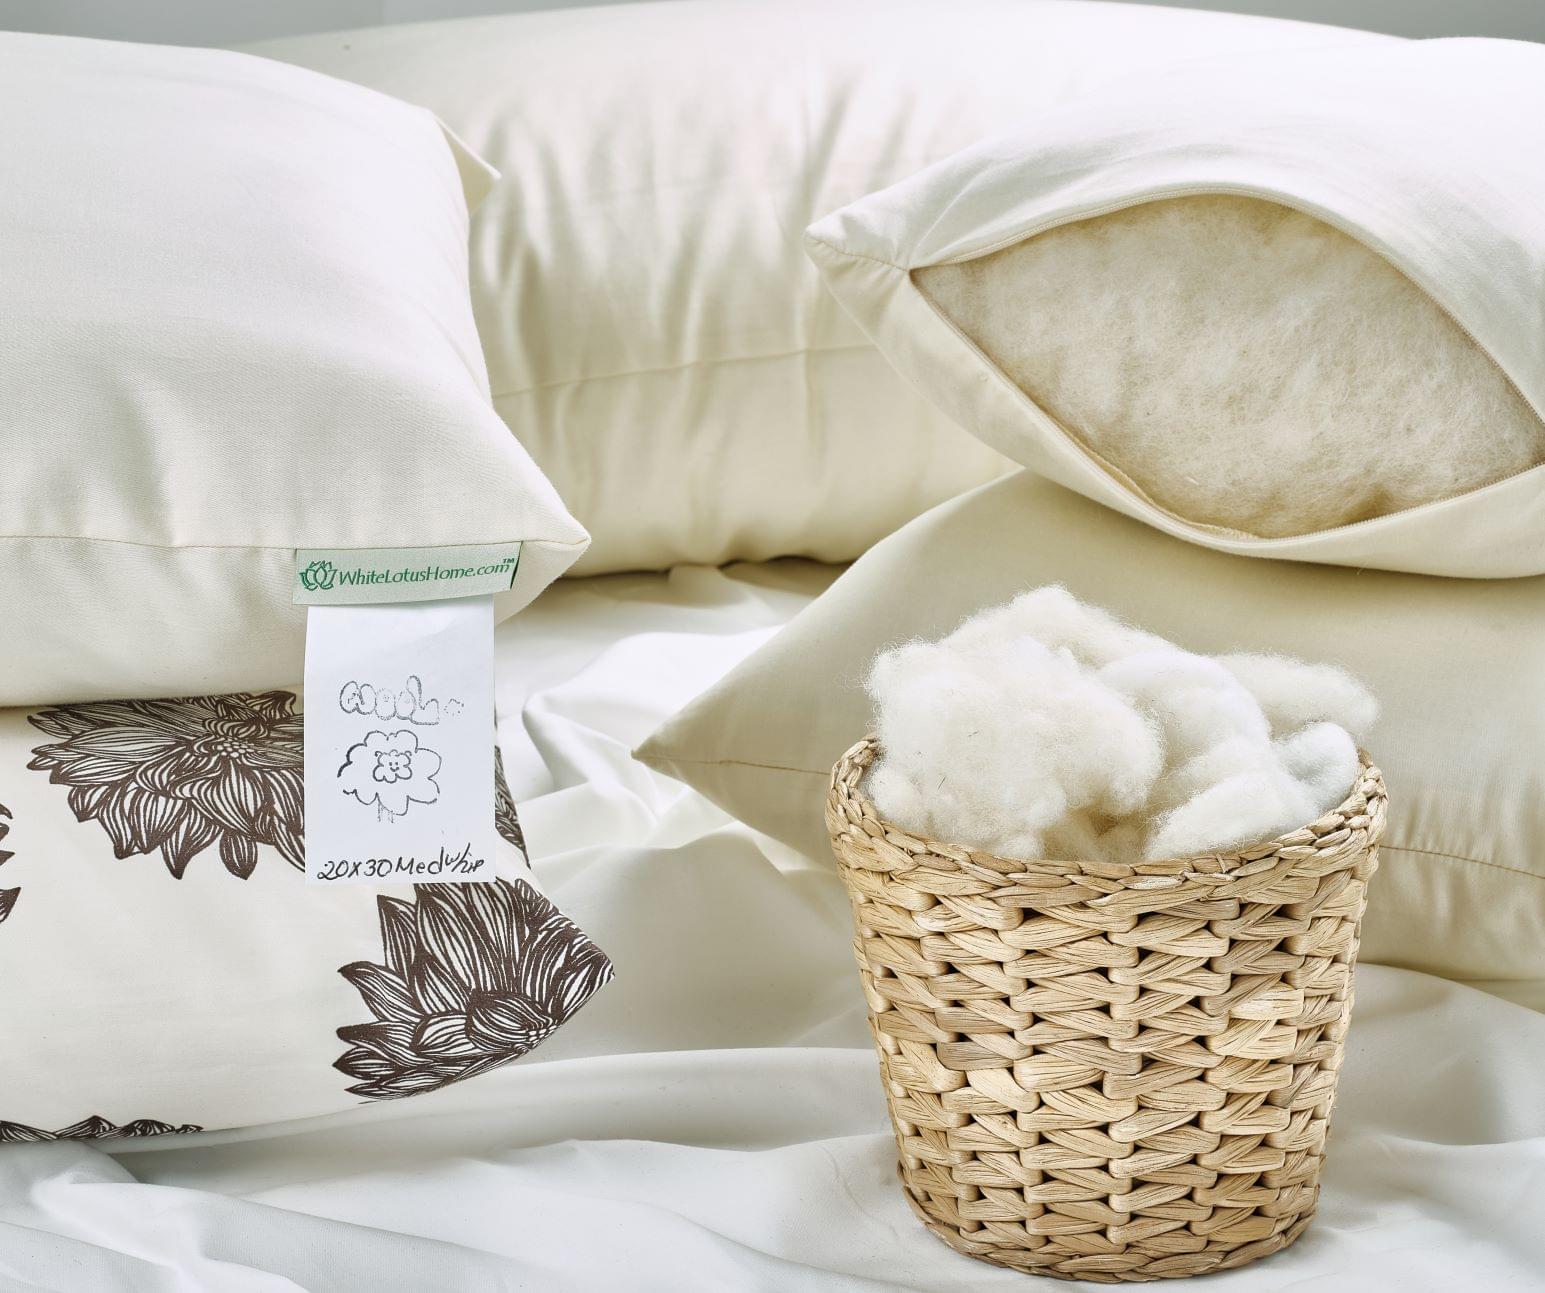 White Lotus Home GOTS Organic Cotton Decorative Pillow Inserts at